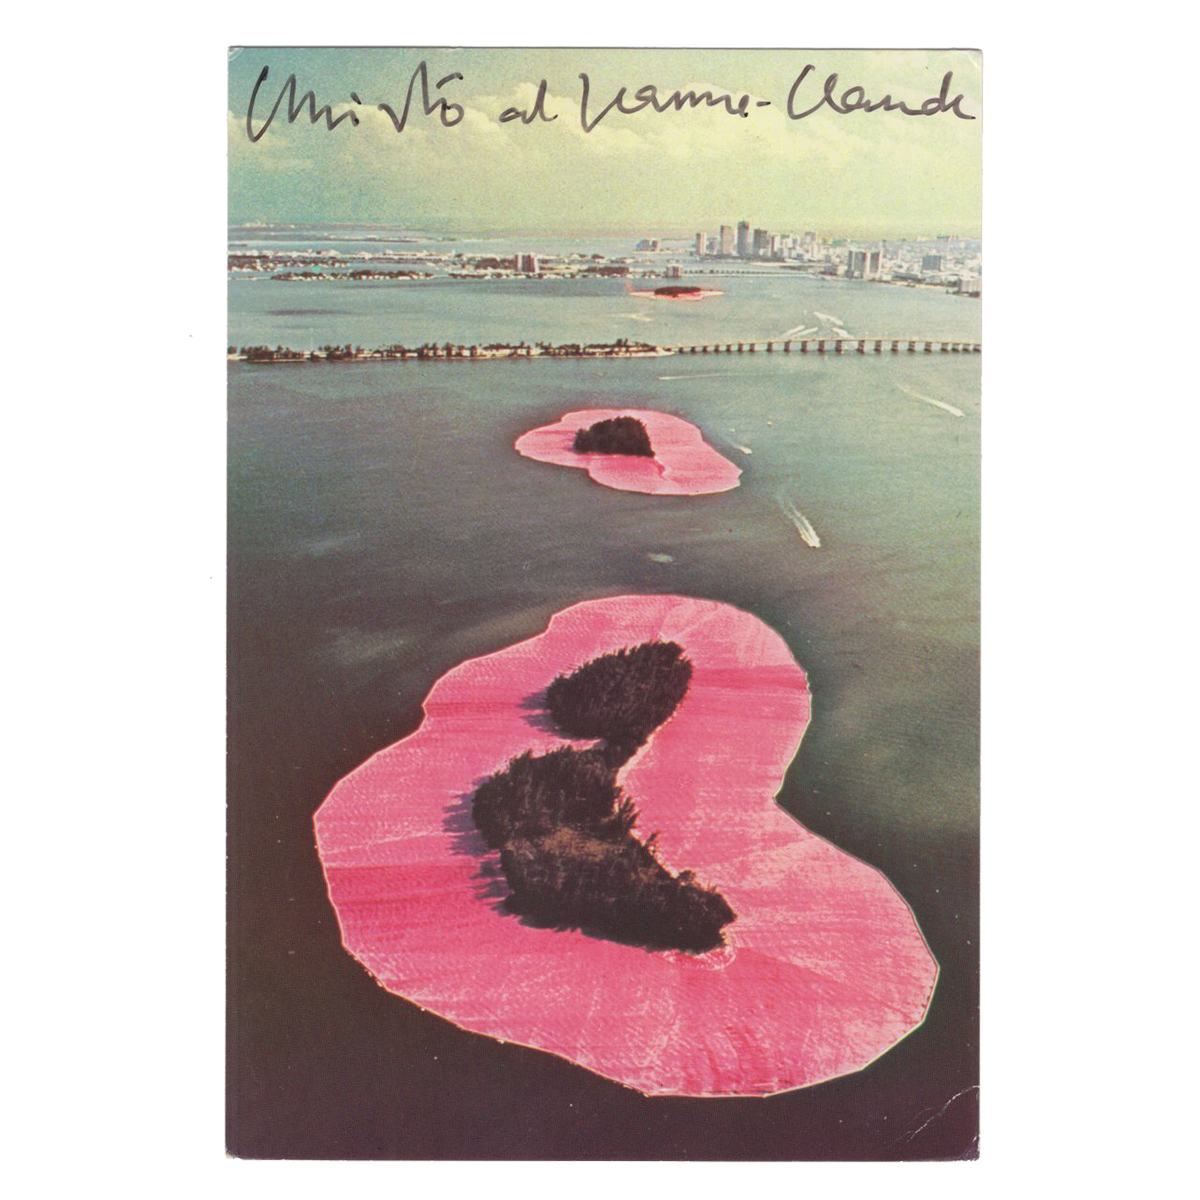 Christo - Signed &#39;Surrounded Islands&#39; Postcard